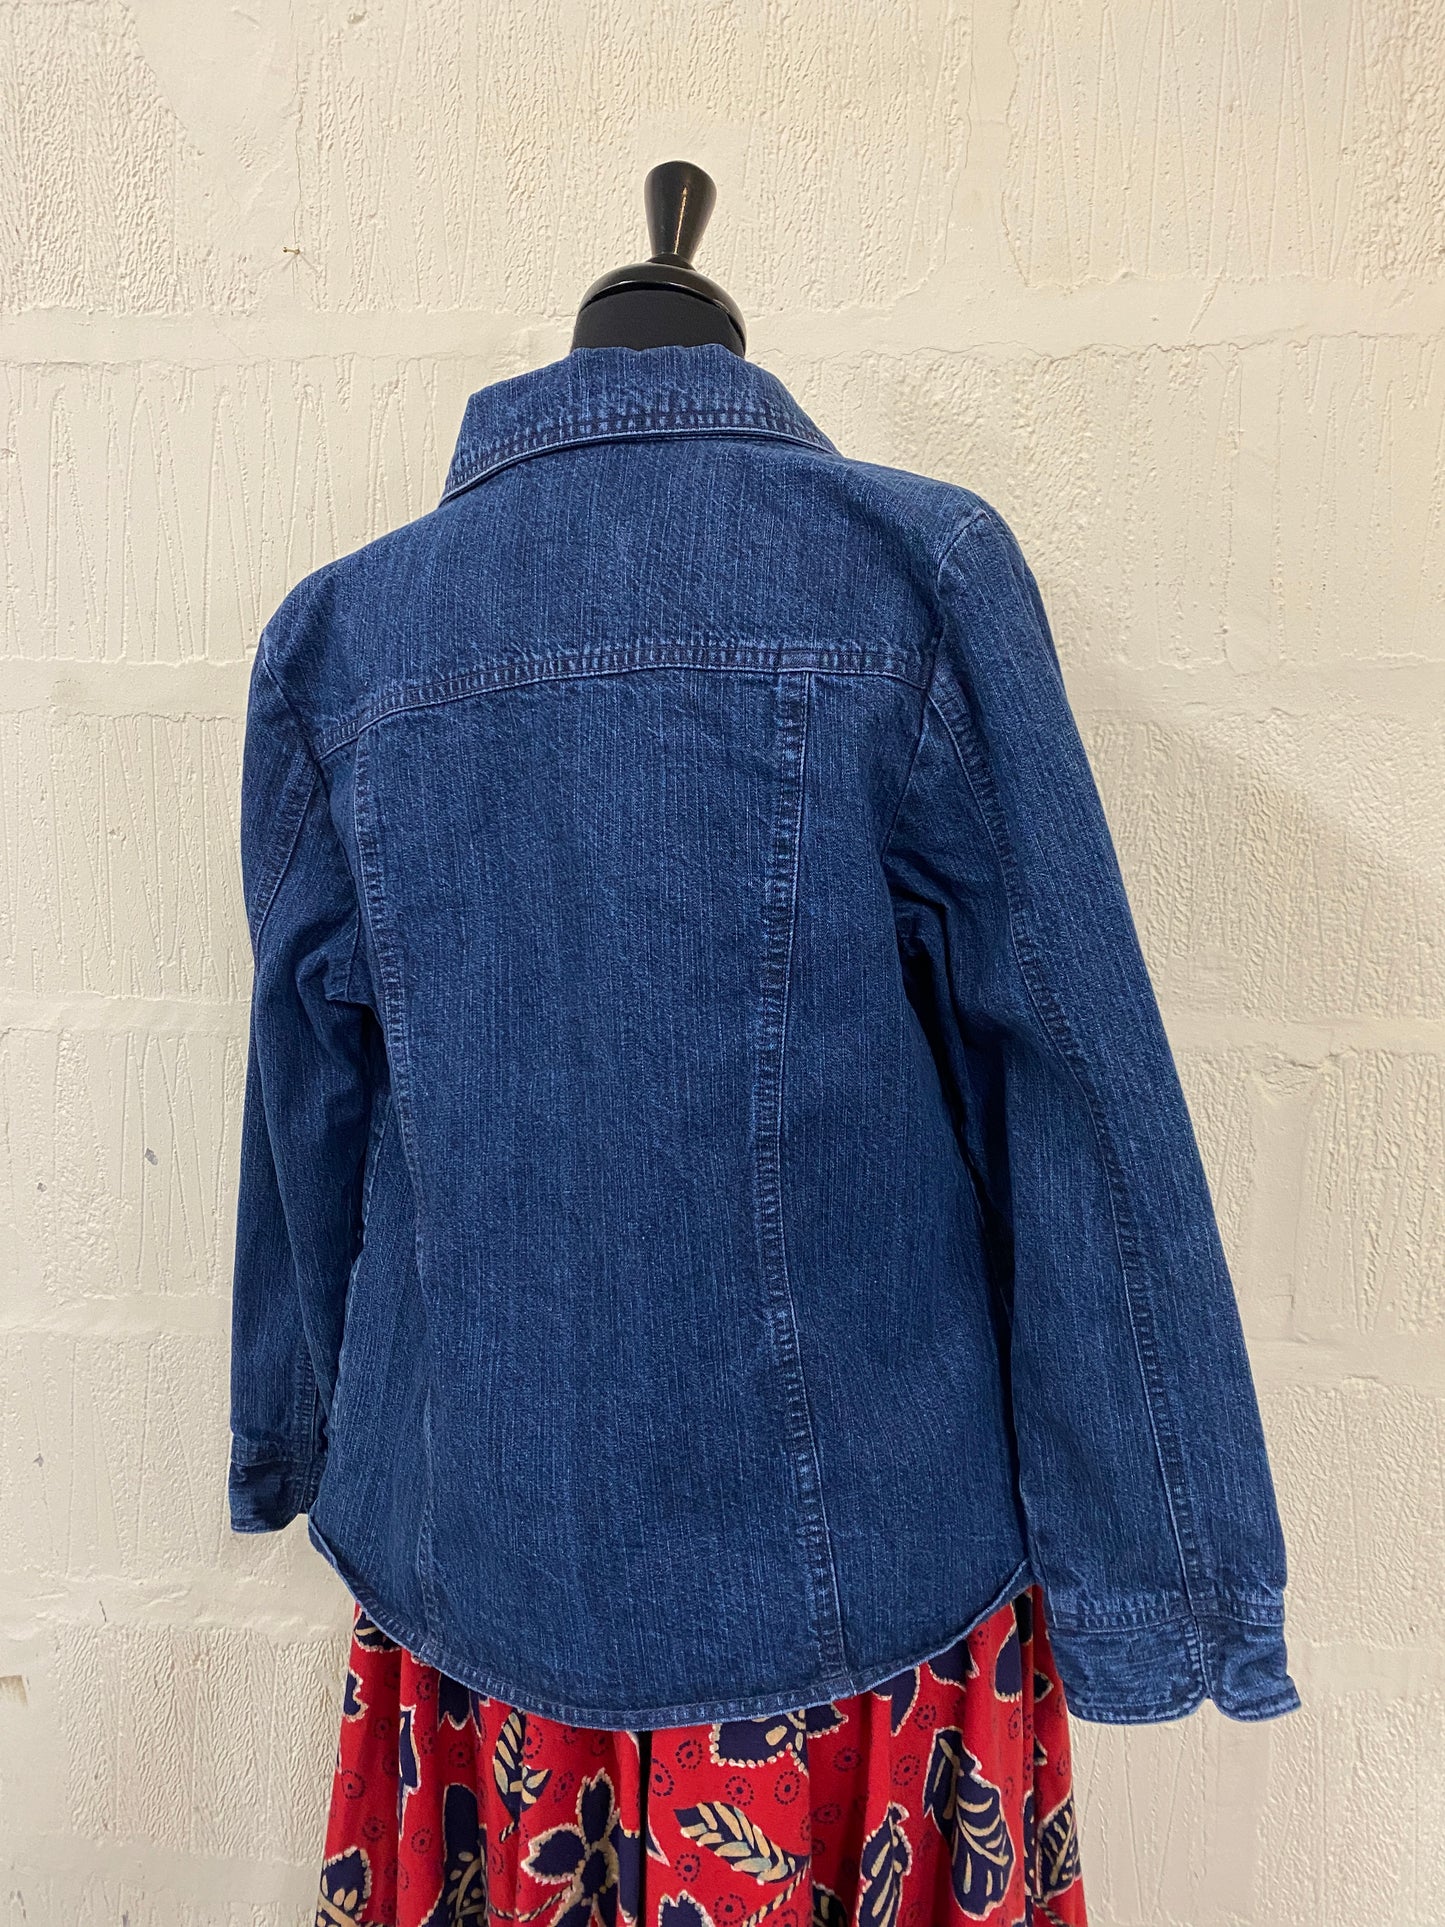 Denim Jacket with Button Front Size 12